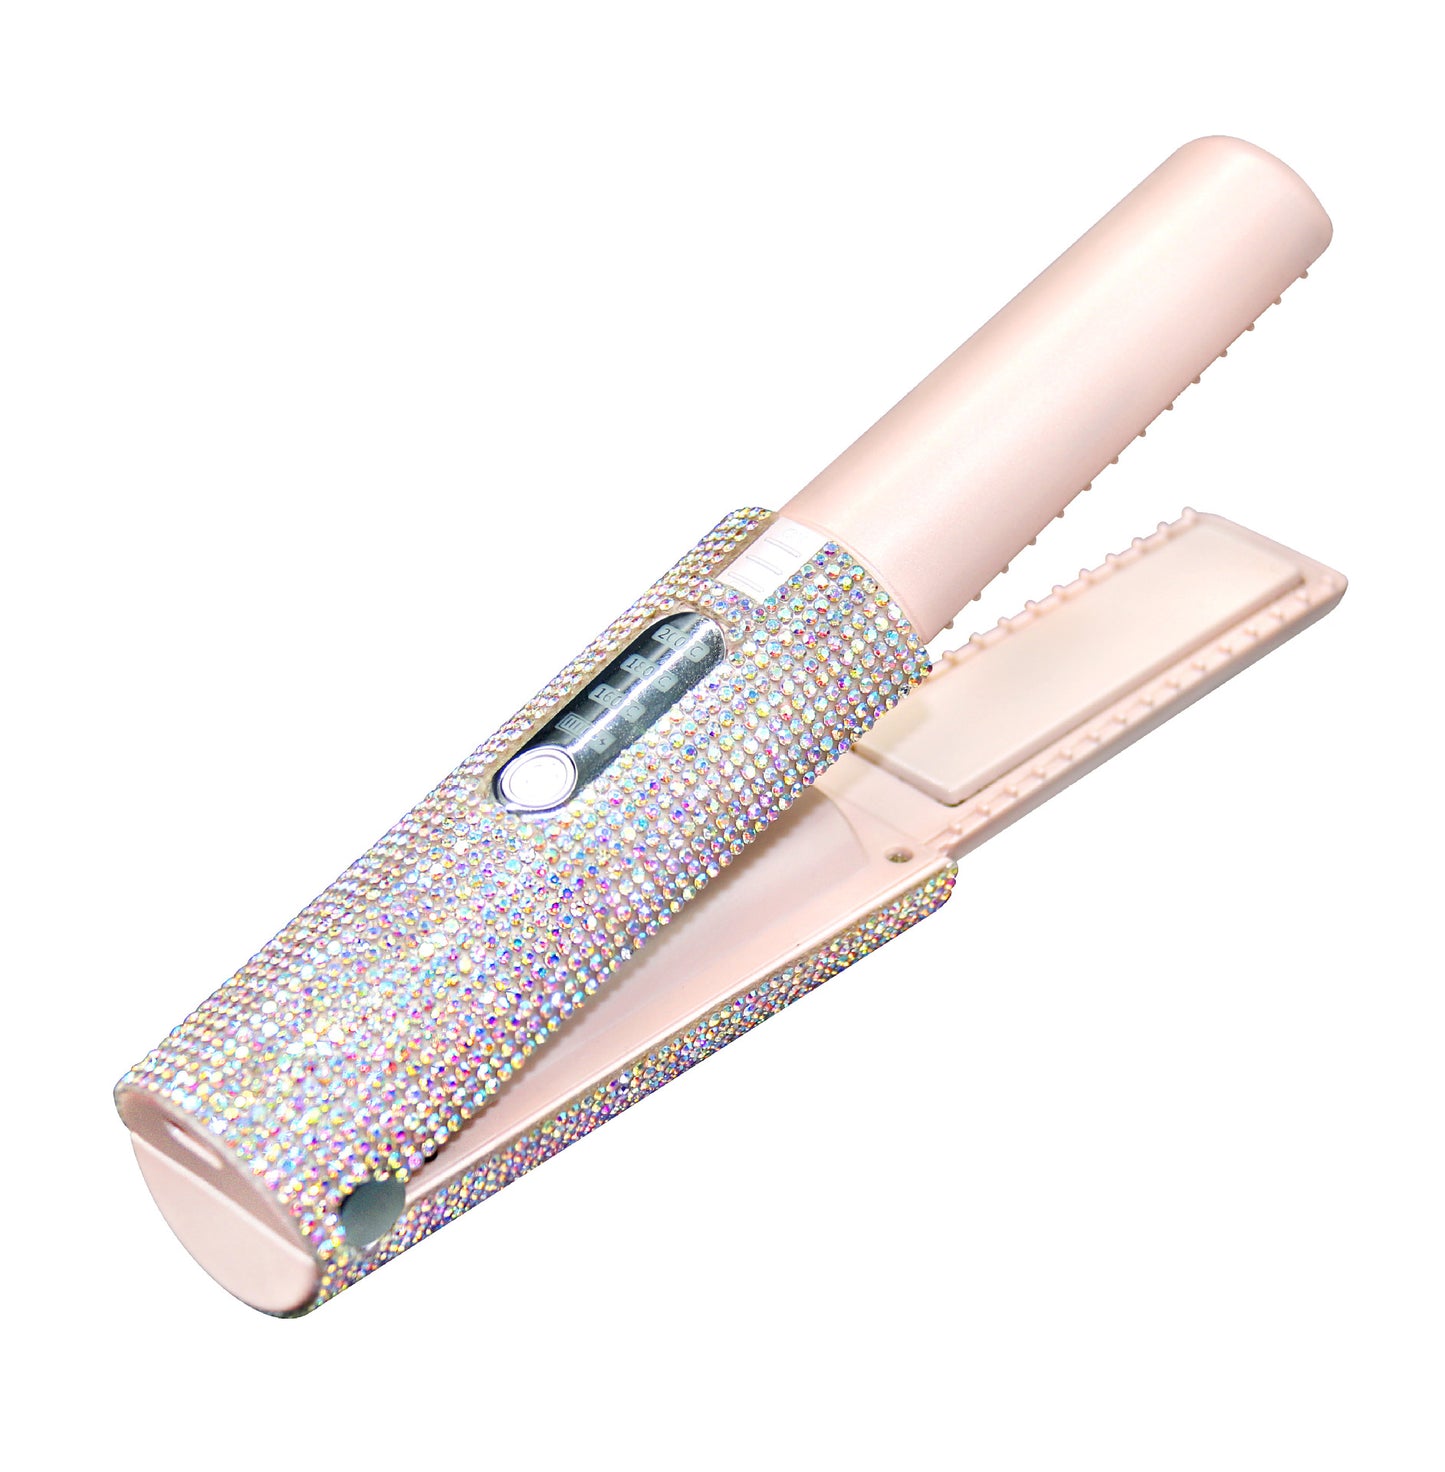 Rechargeable USB Portable Hair Straighteners